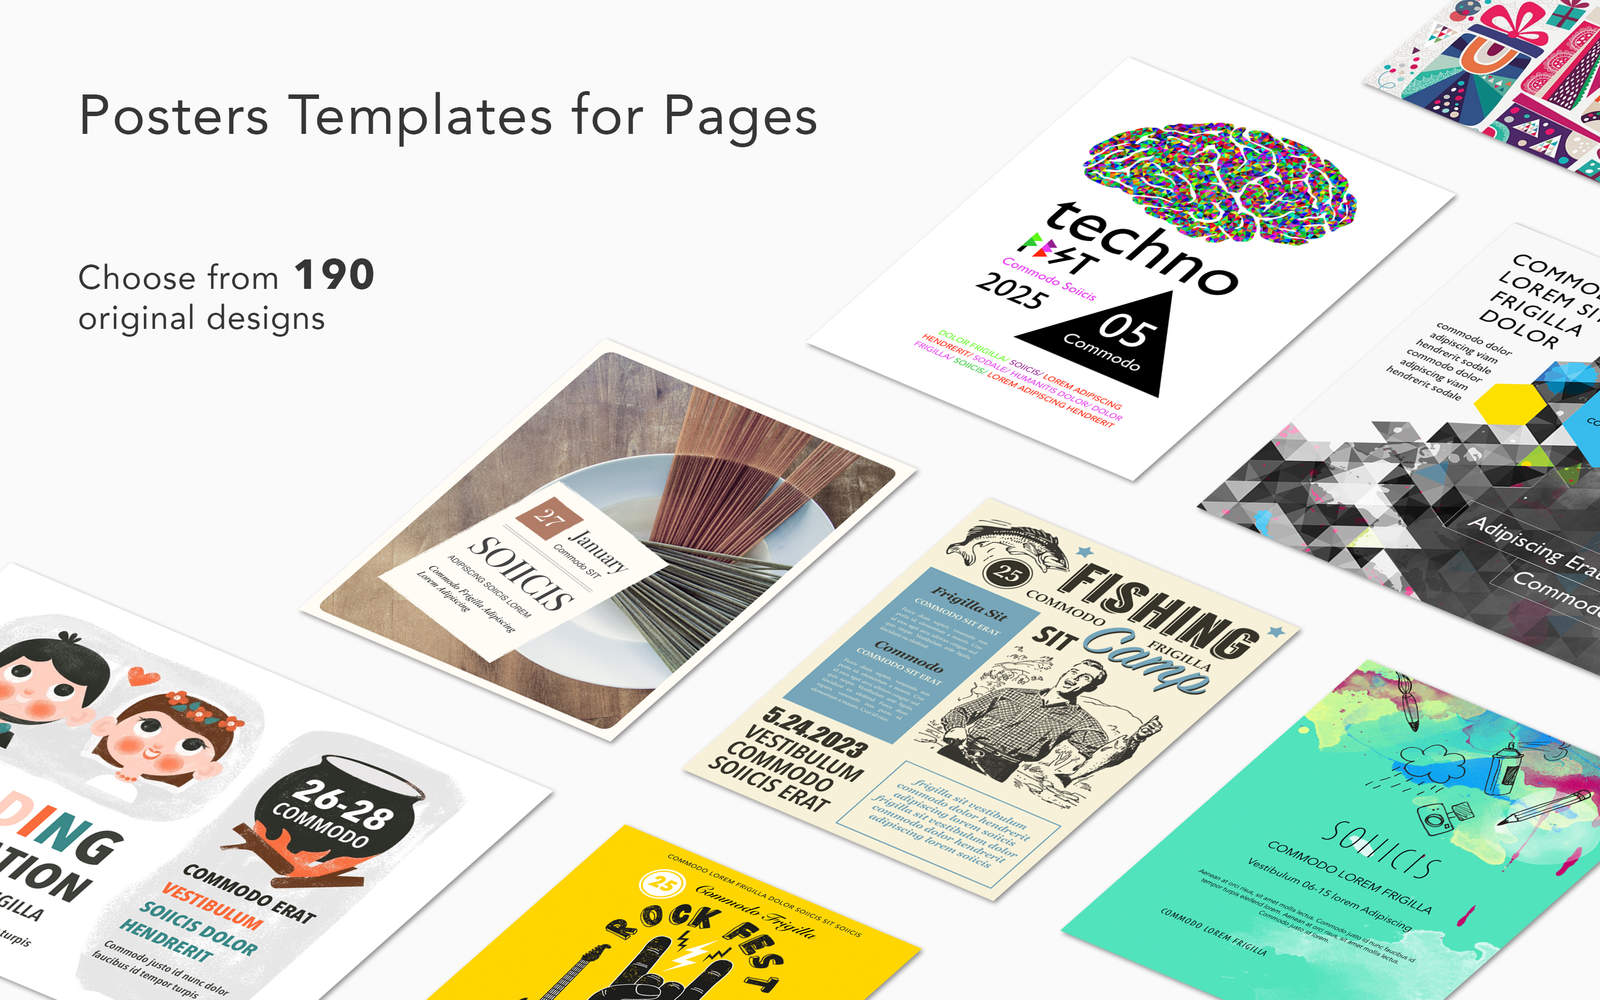 Posters Templates for Pages 1.3 : Main Window